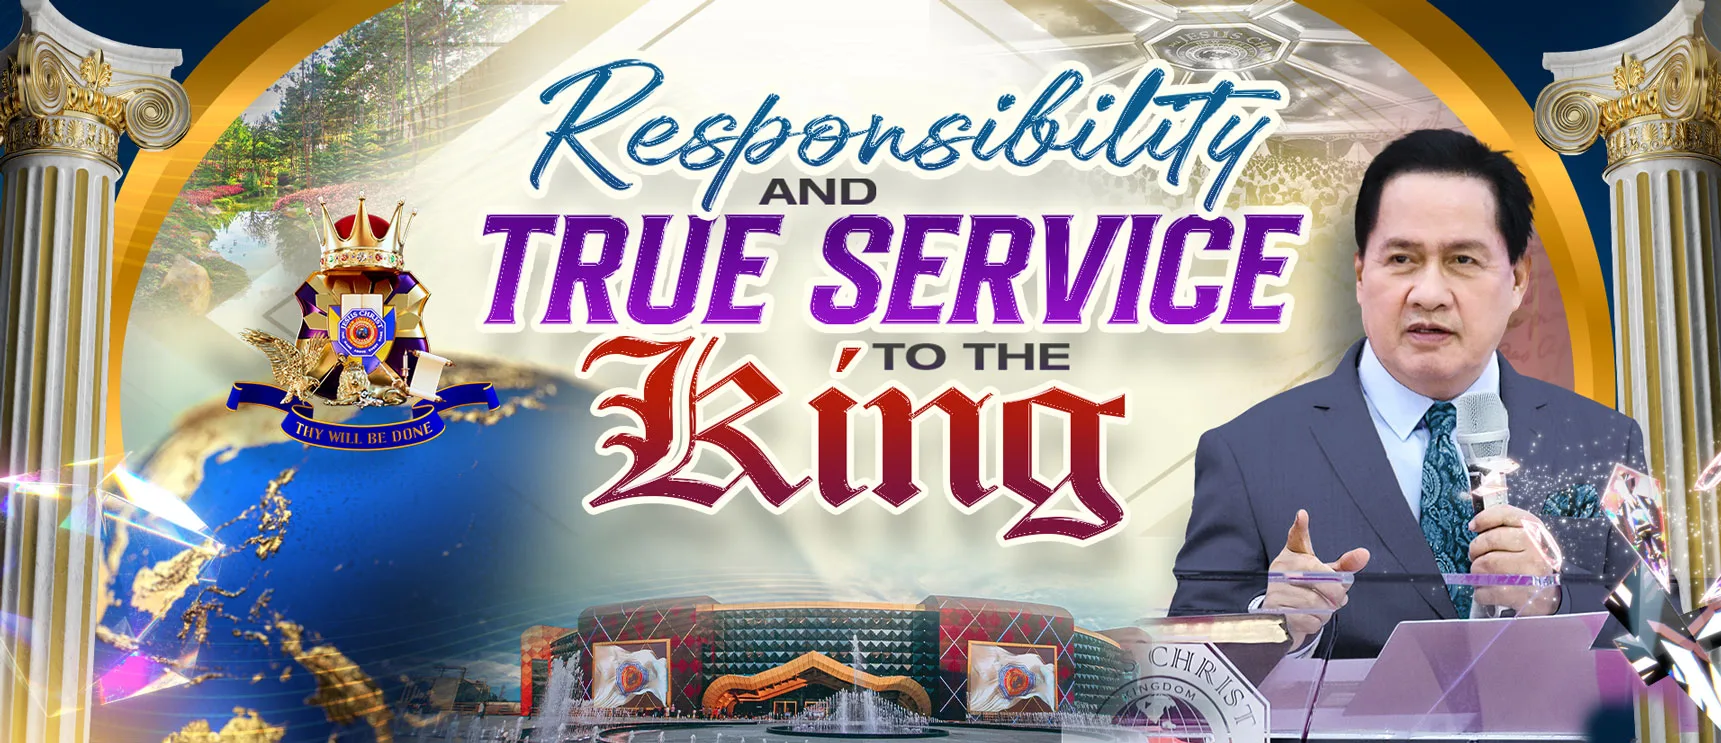 RESPONSIBILITY AND TRUE SERVICE TO THE KING wide2 jpg